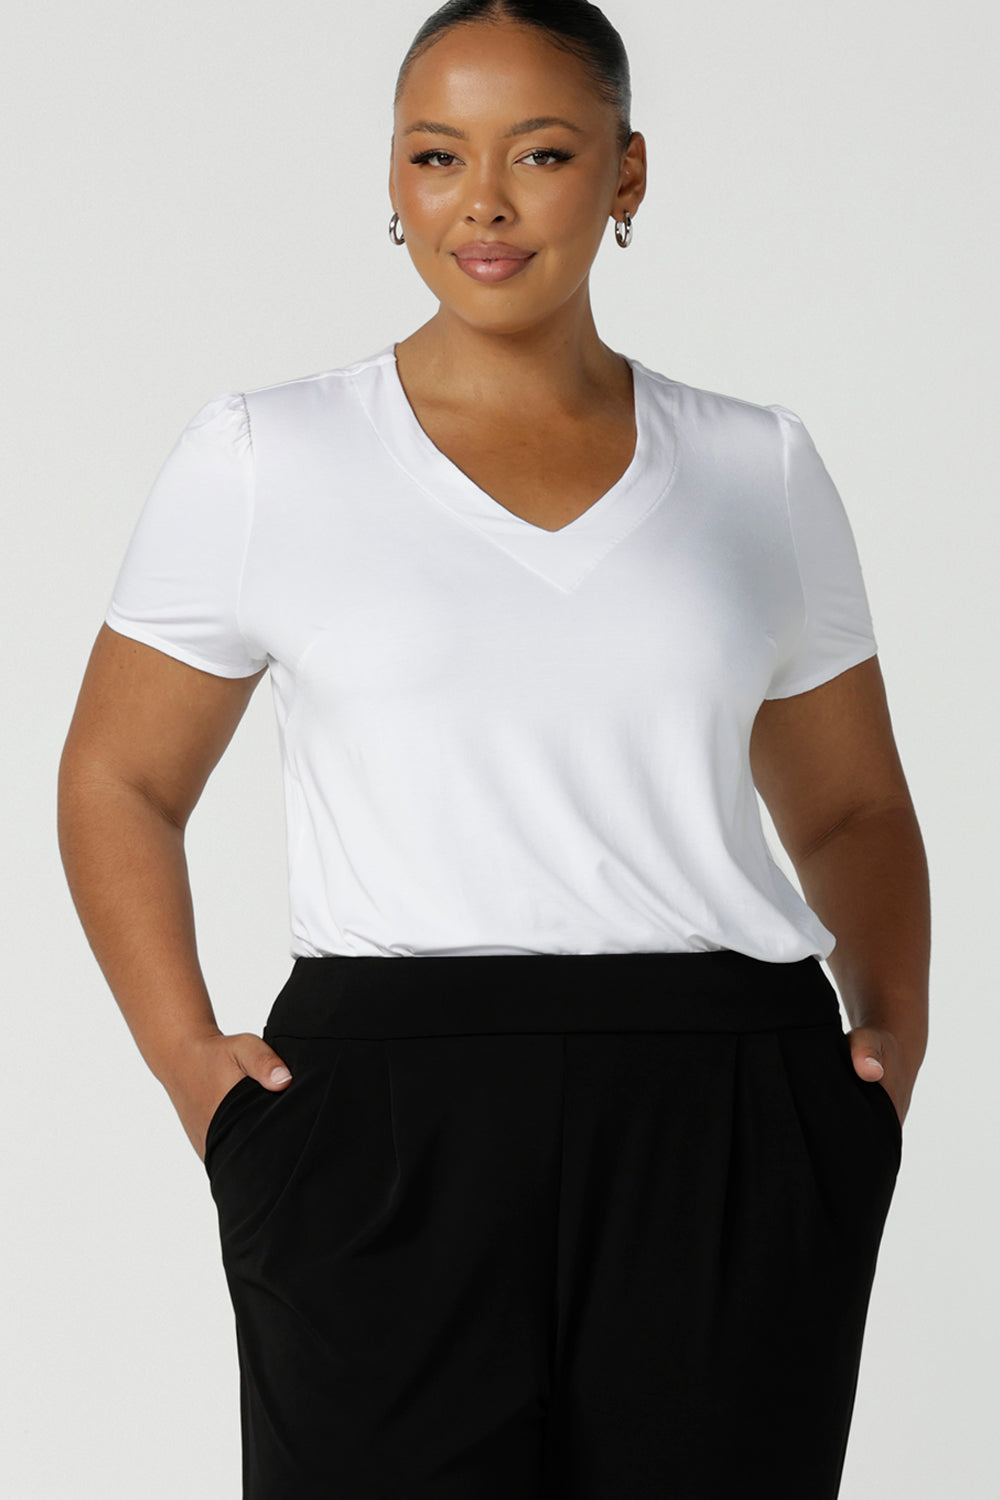 A size 18, plus size woman wears a V-neck, short sleeve top in white bamboo jersey. This tailored white top cuts a T-shirt look for casual wear and comfortable curve workwear. Shop made-in-Australia bamboo jersey tops online in petite, mid size and plus sizes at women's clothing brand, Leina & Fleur.